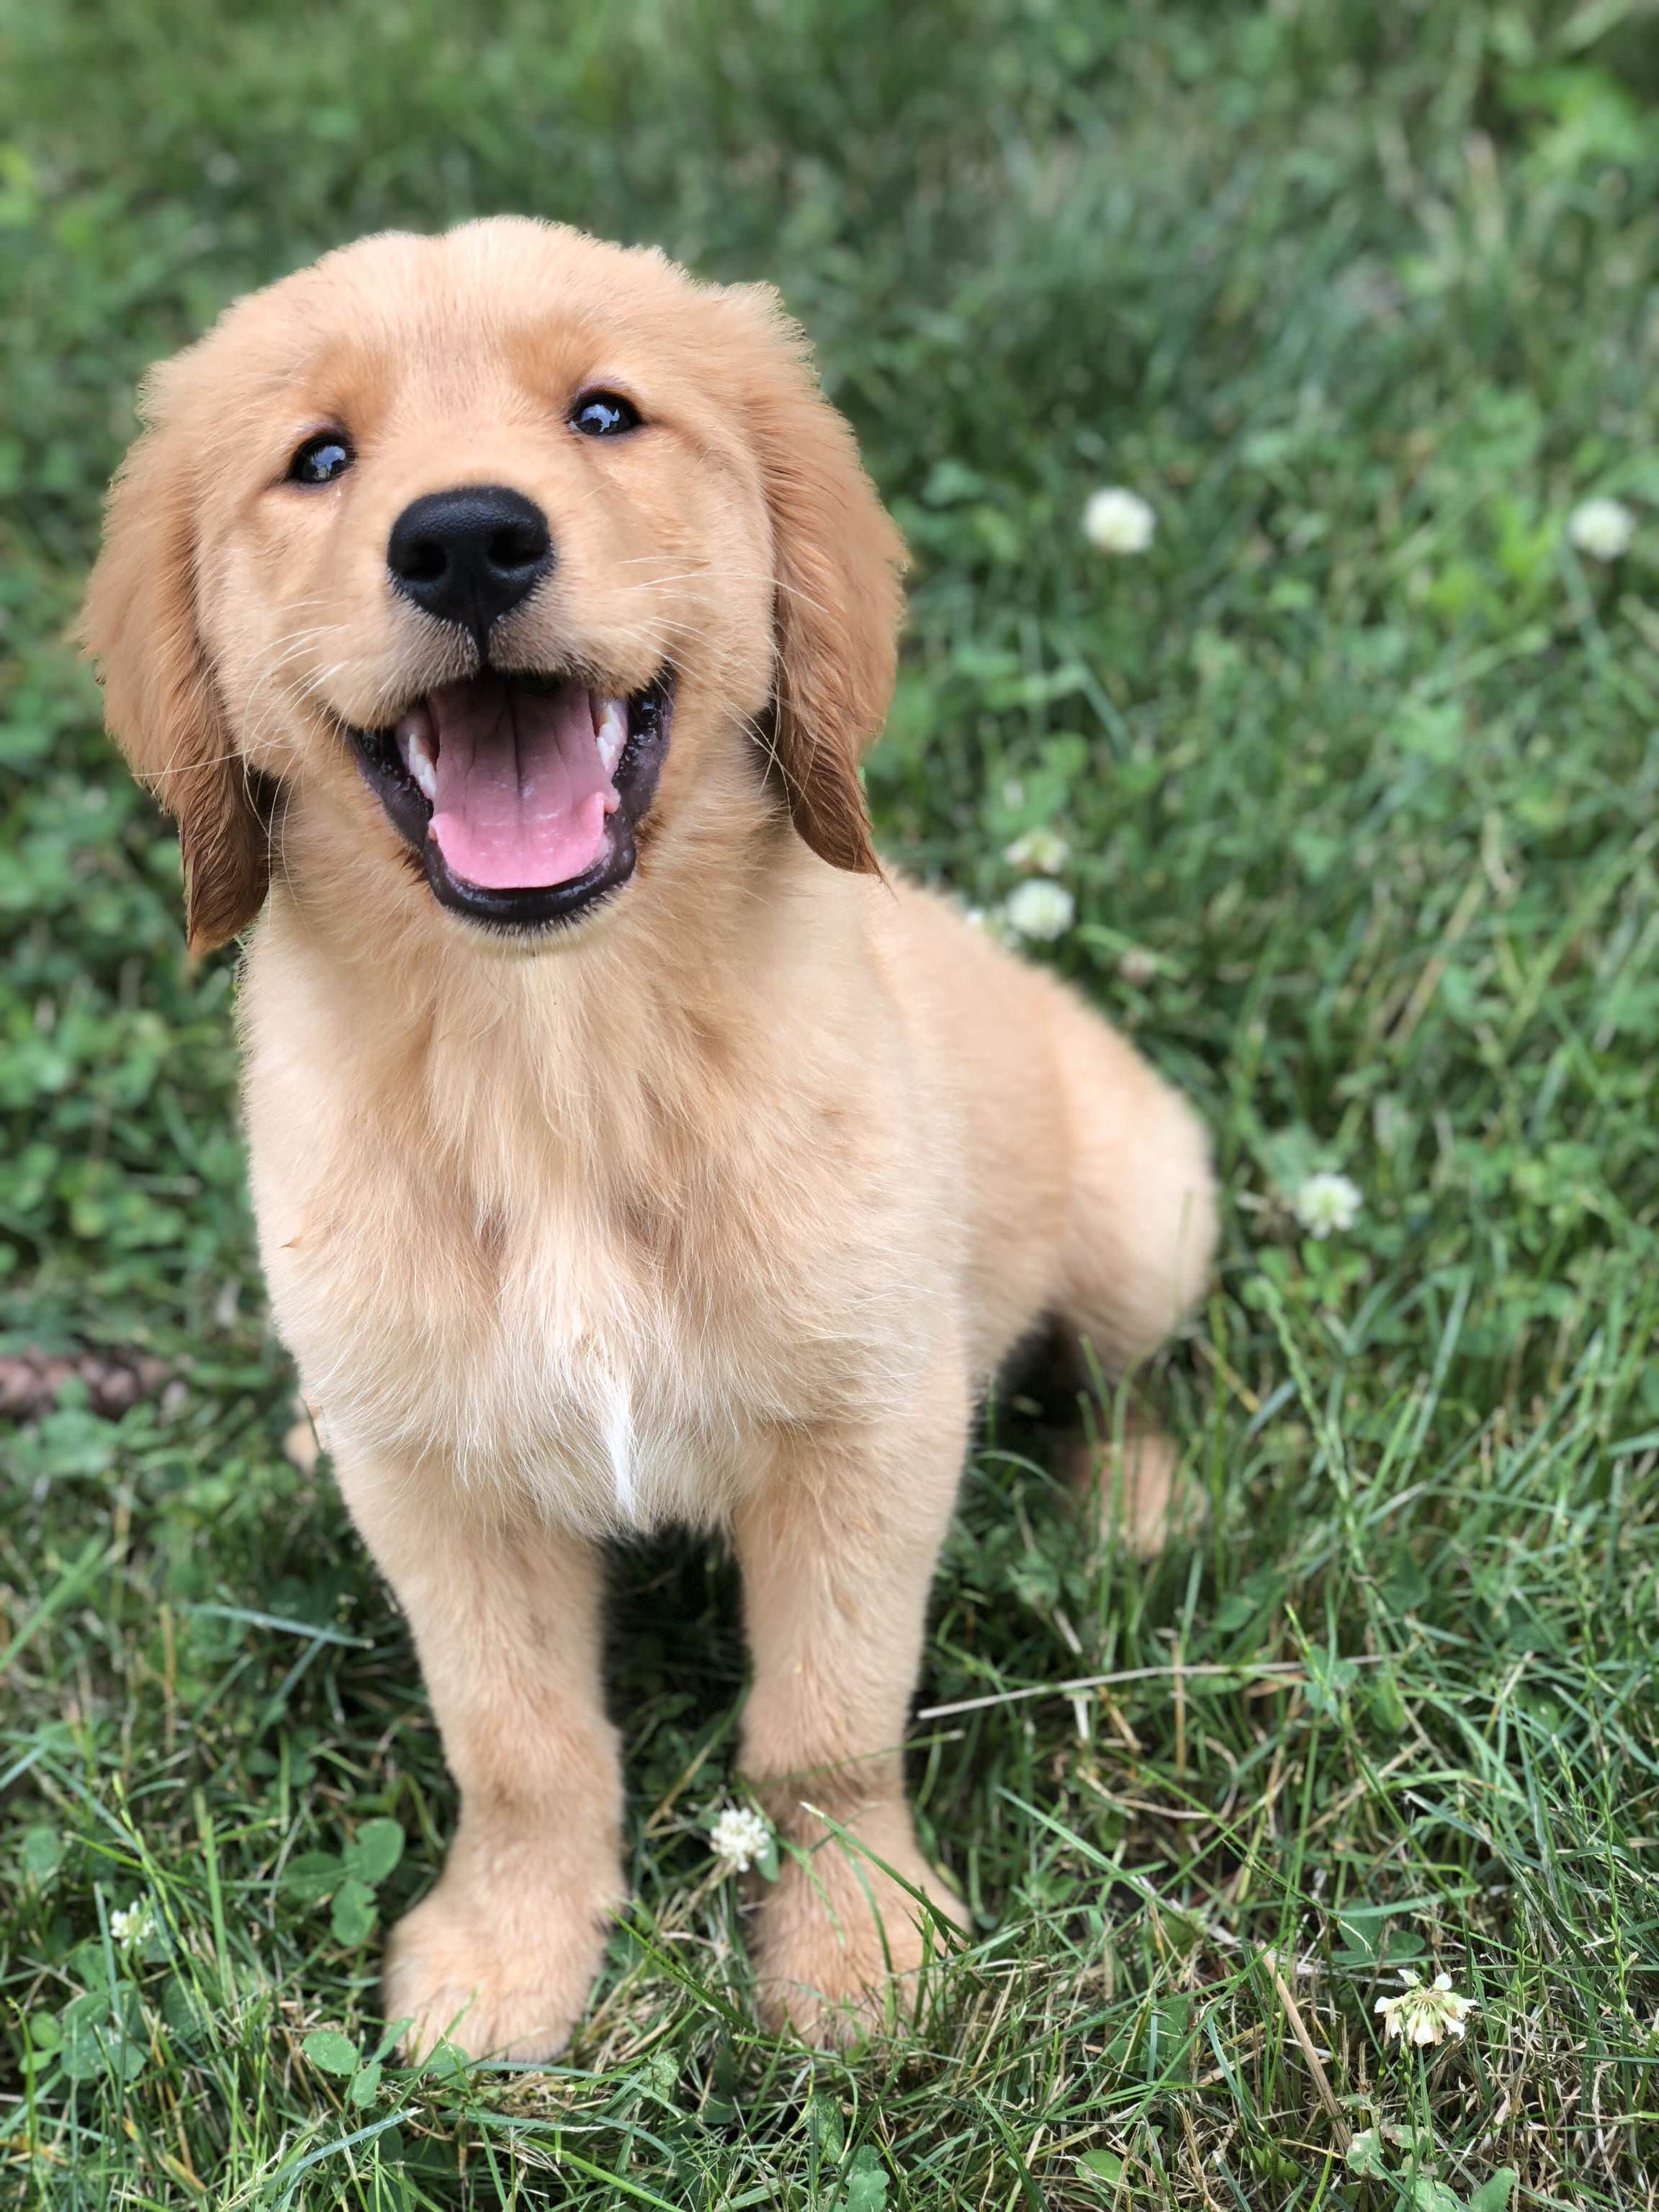 A happy Golden Retriever puppy sitting on the grass while smiling